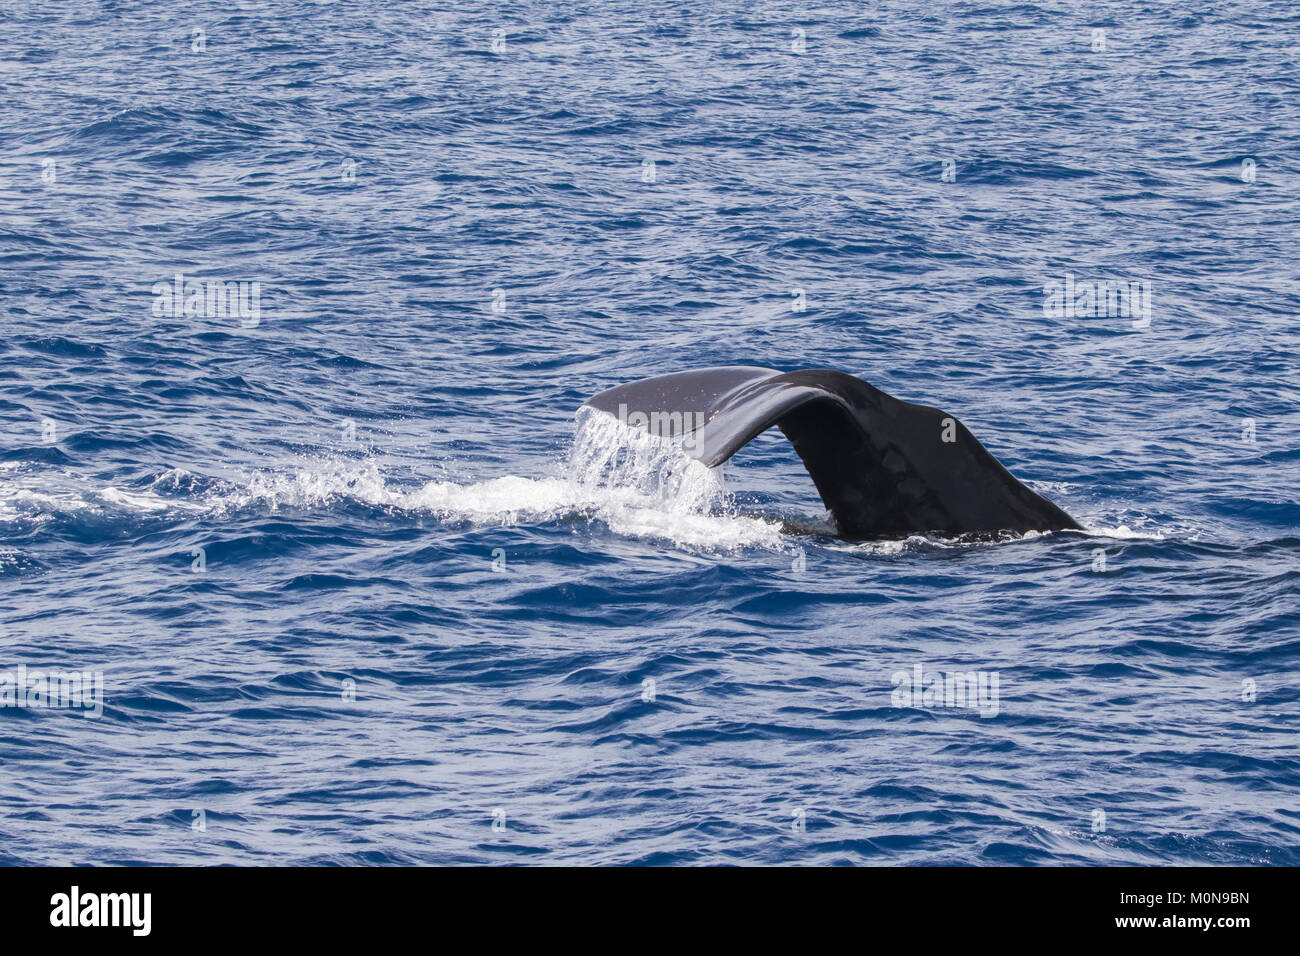 Female Sperm Whale (Physeter macrocephalus) surfacing for breath before diving down. They sometimes getting curious and approach our boat Stock Photo